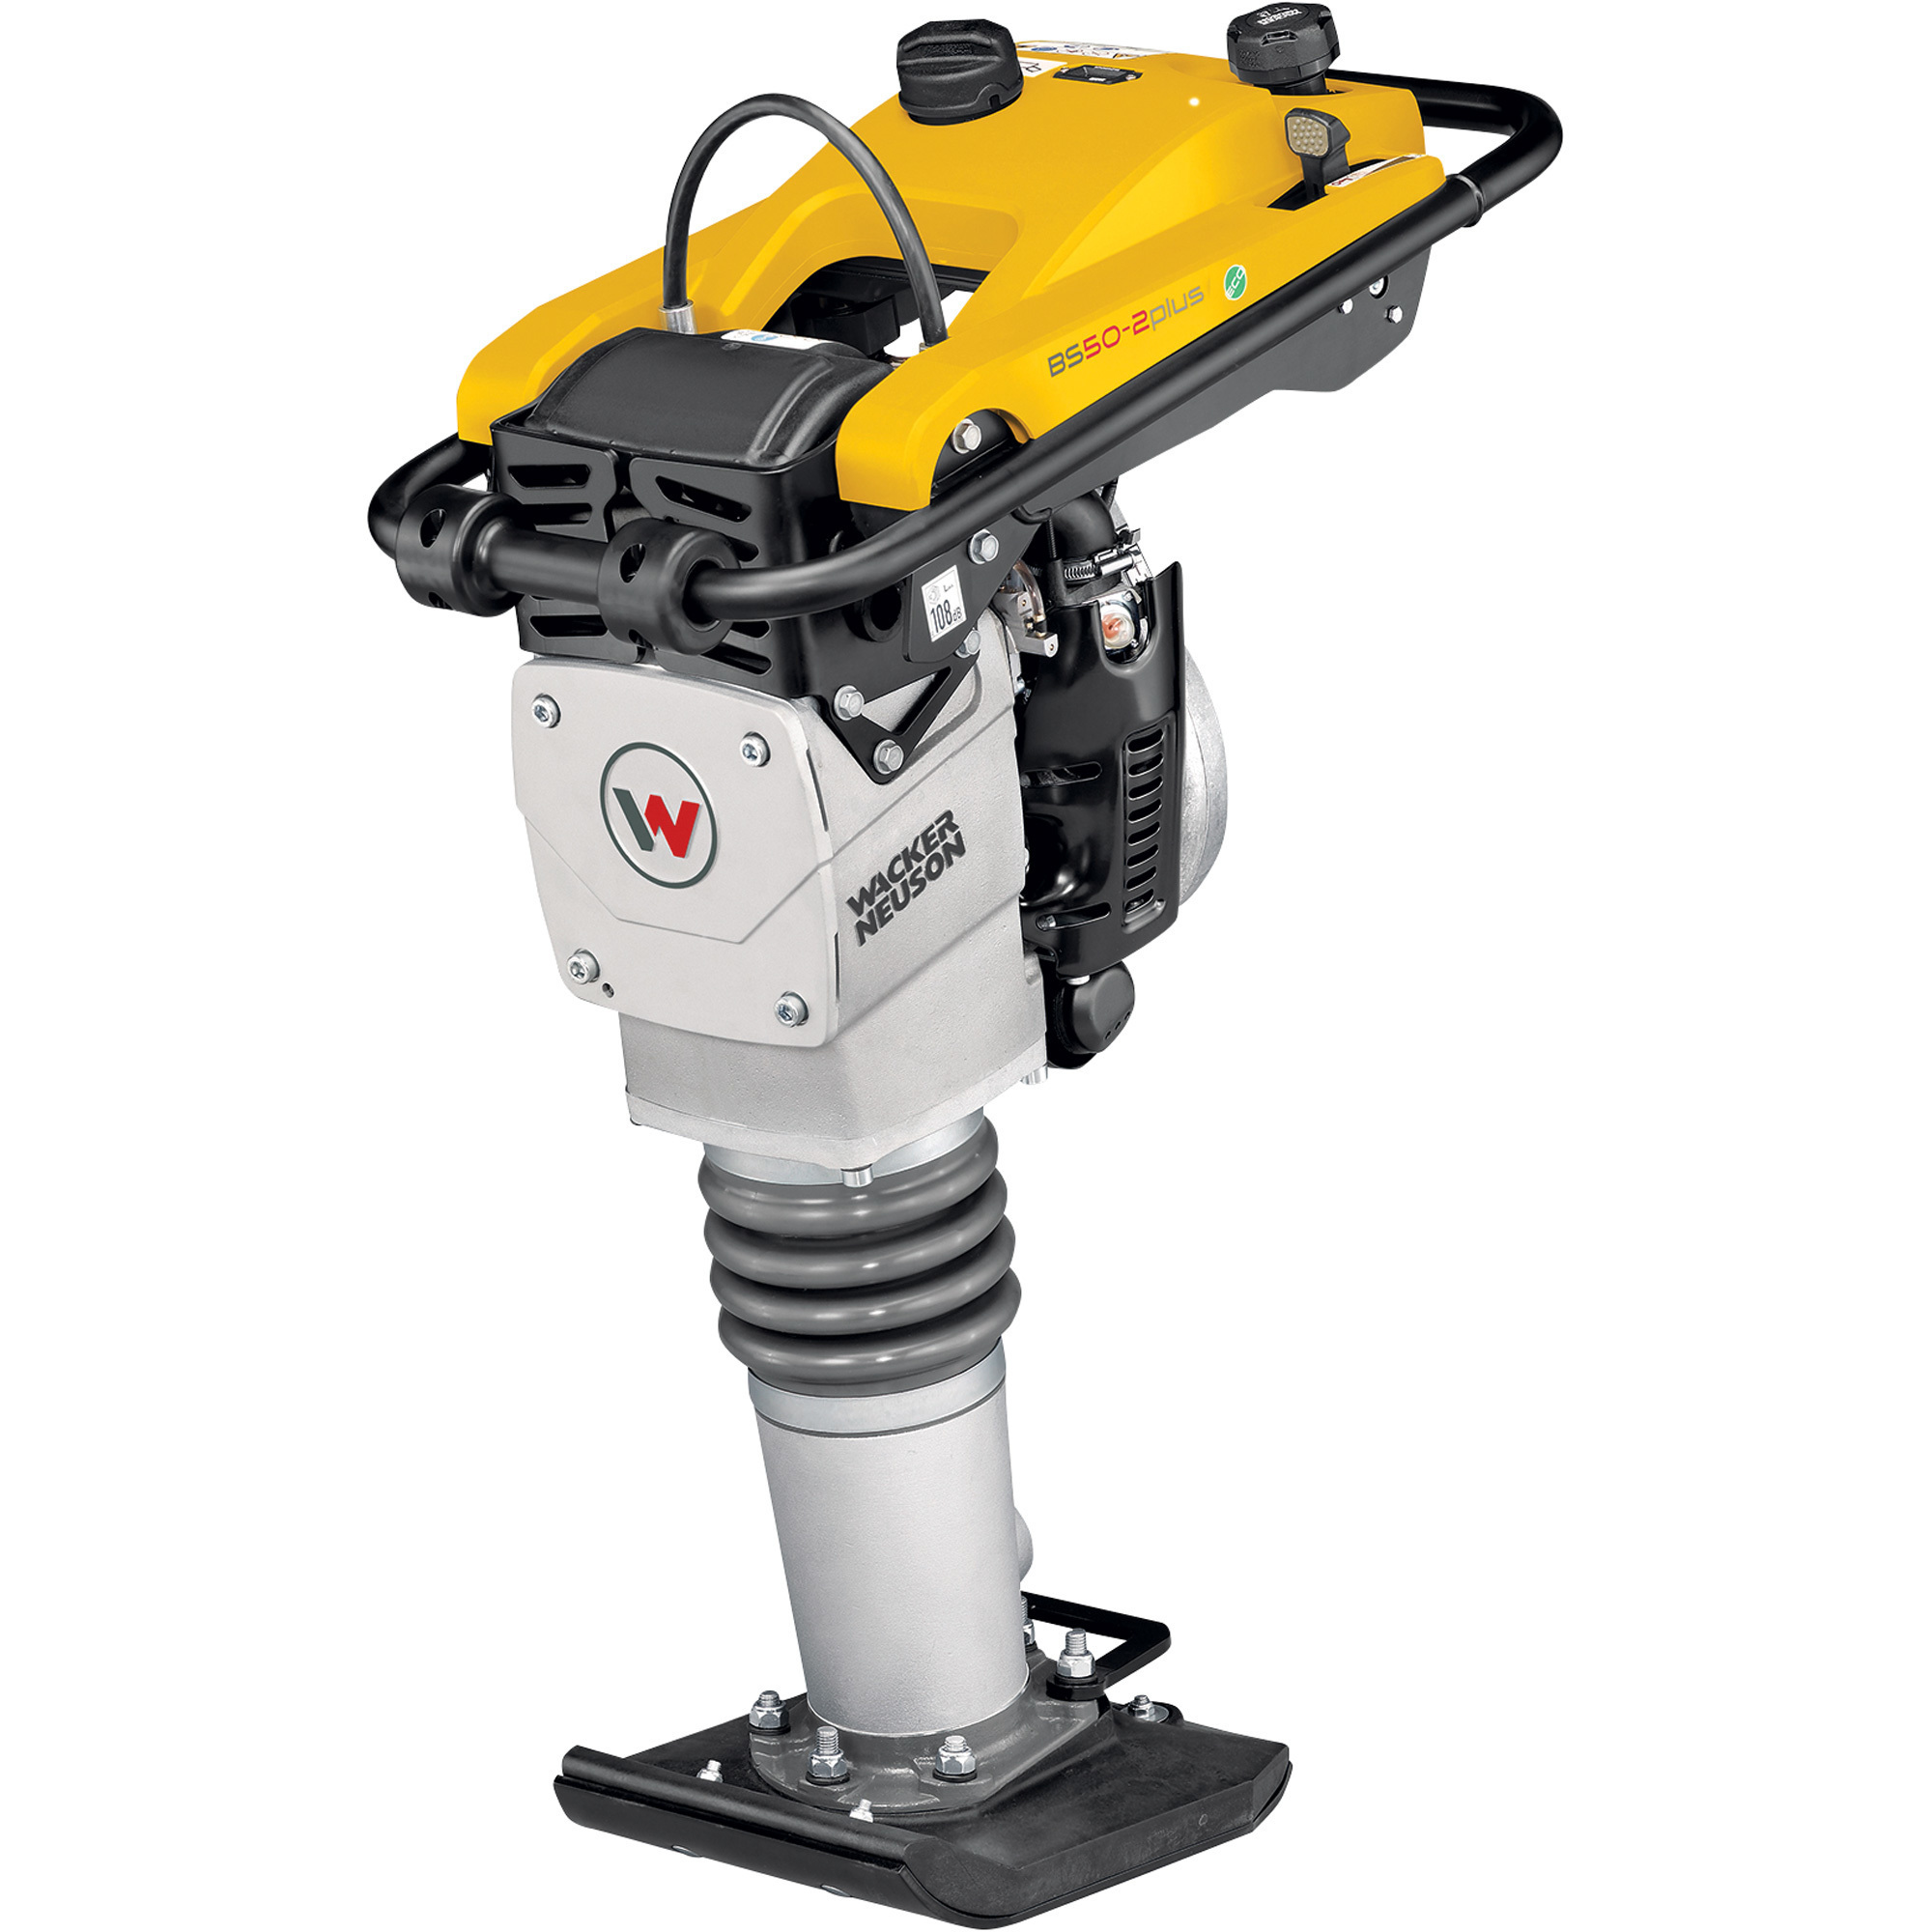 Wacker Neuson BS50-2PLUS 11Inch Two-Stroke Oil-Injected Rammer, High Altitude, 2.3 HP, 1-Cylinder Gas Engine, Model 5100030595